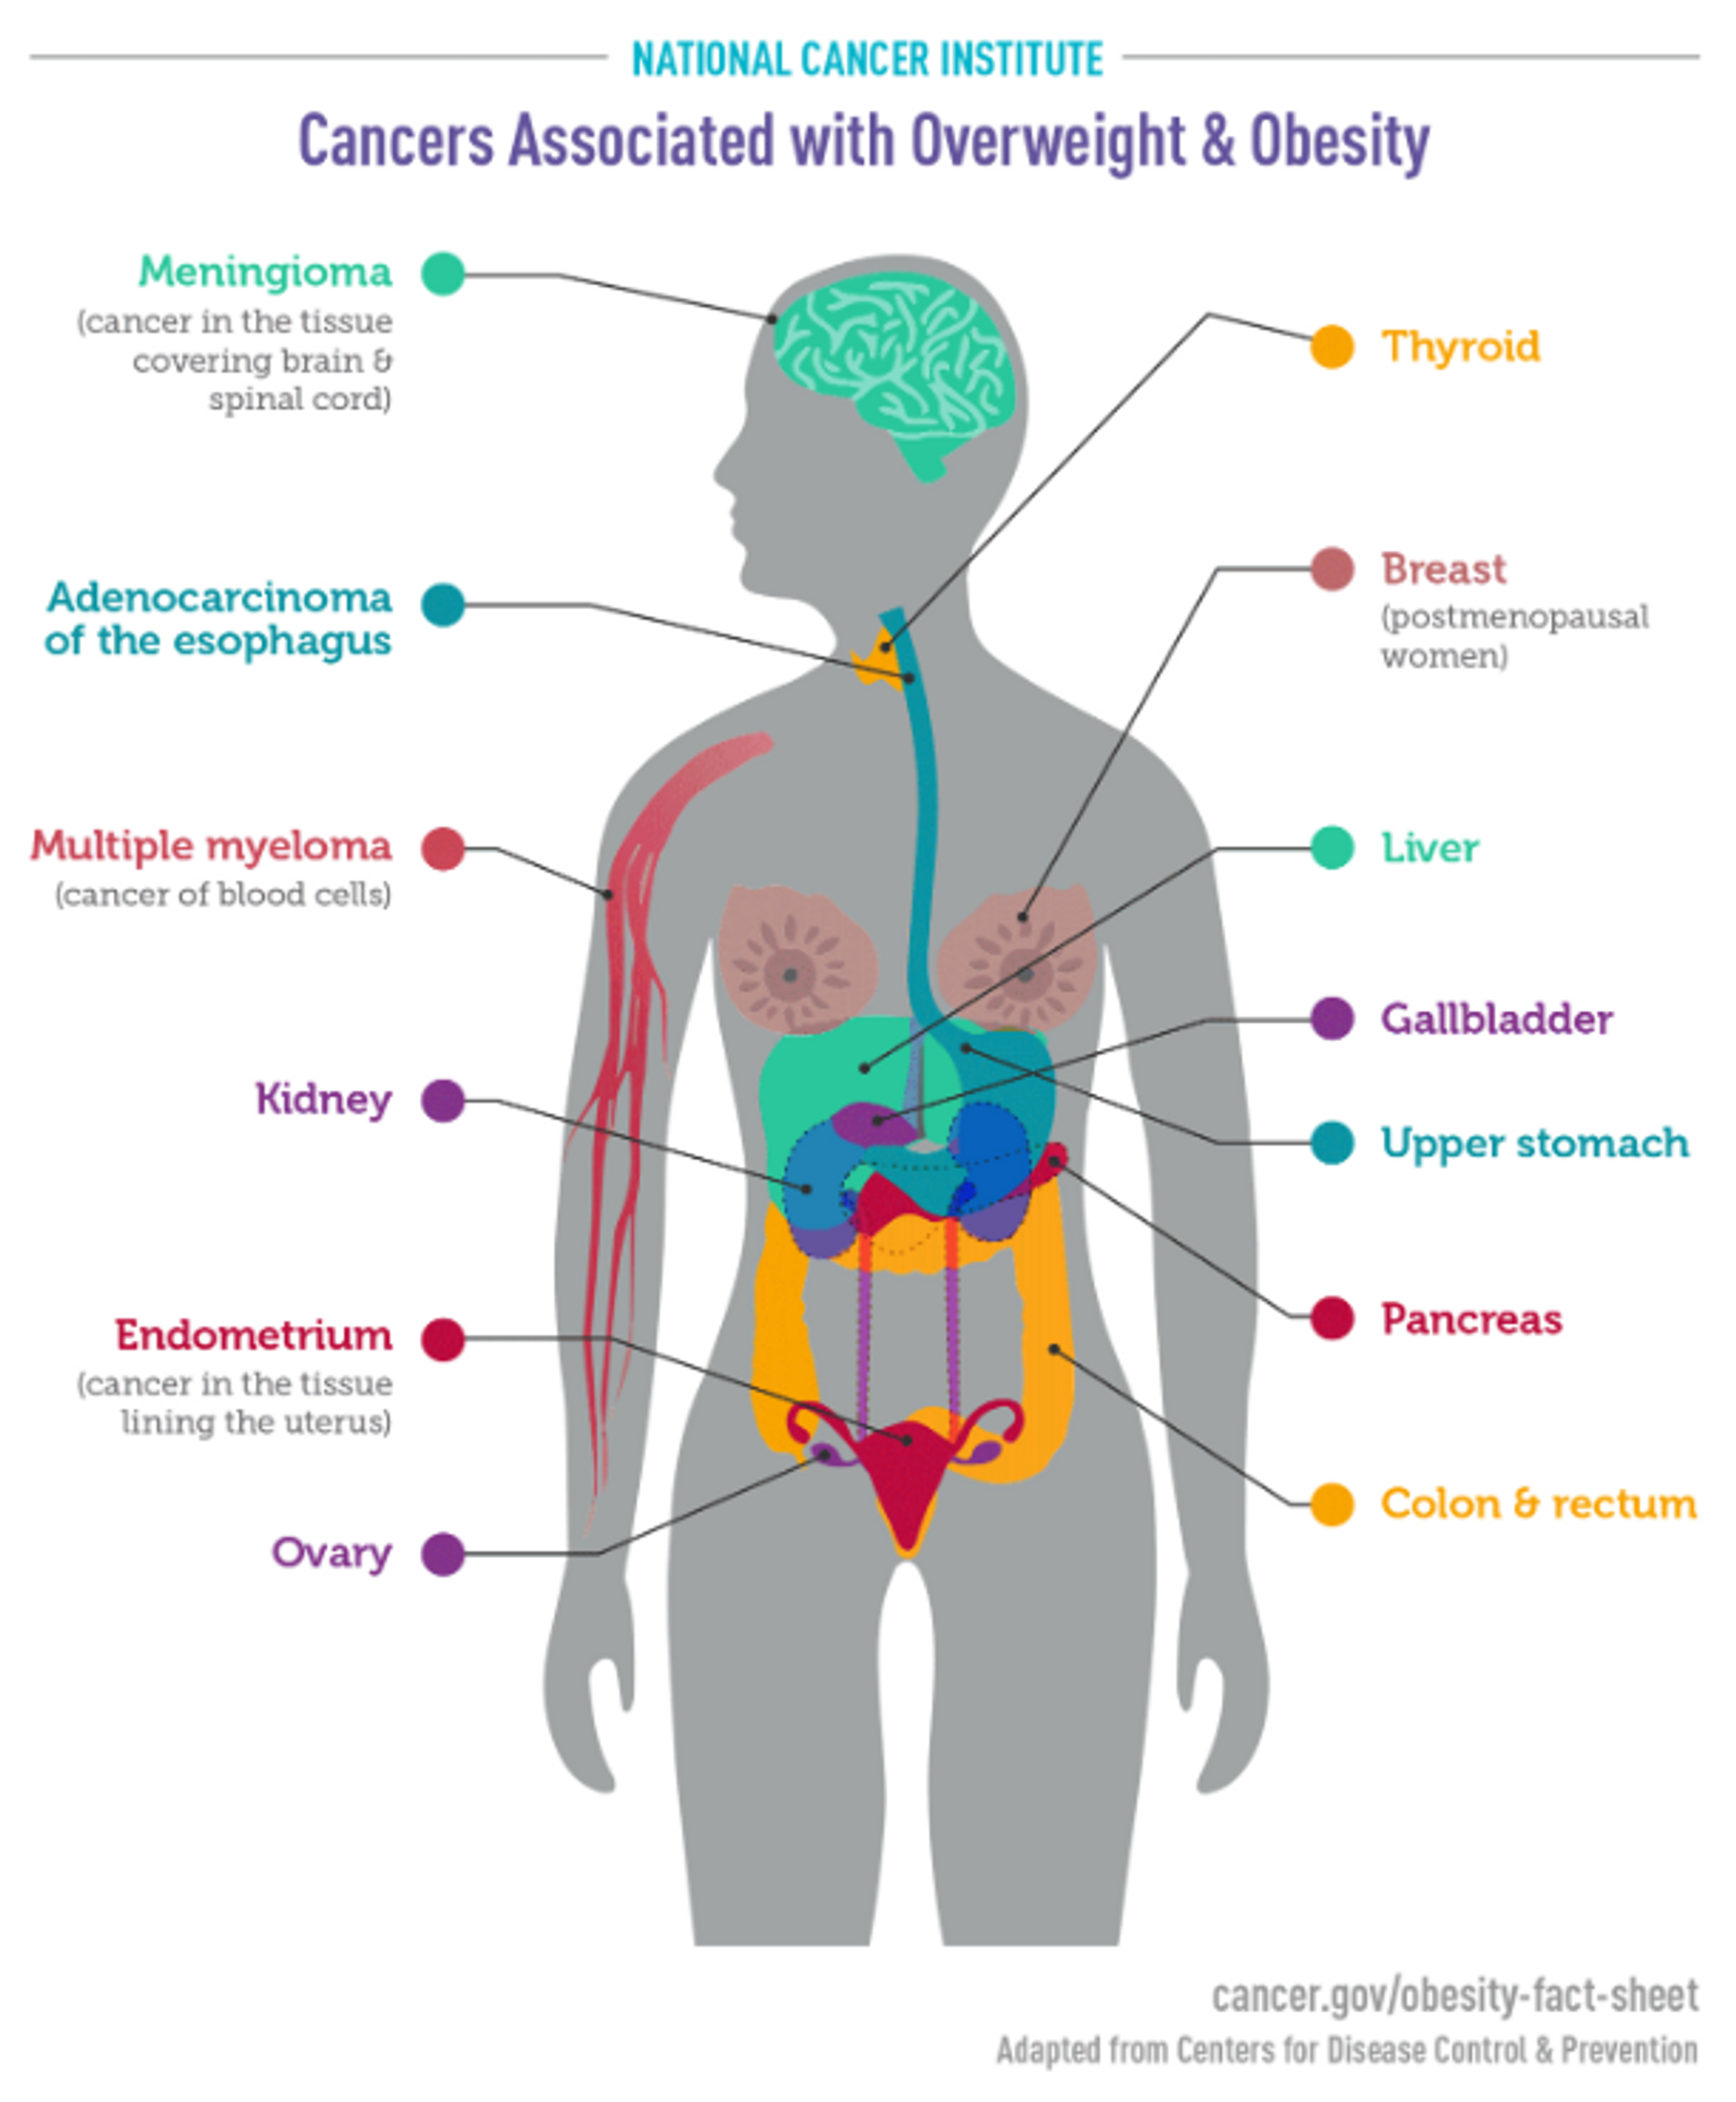 Cancers Associated with Overweight and Obesity infographic from the US National Cancer Institute  - Sputnik International, 1920, 08.04.2022